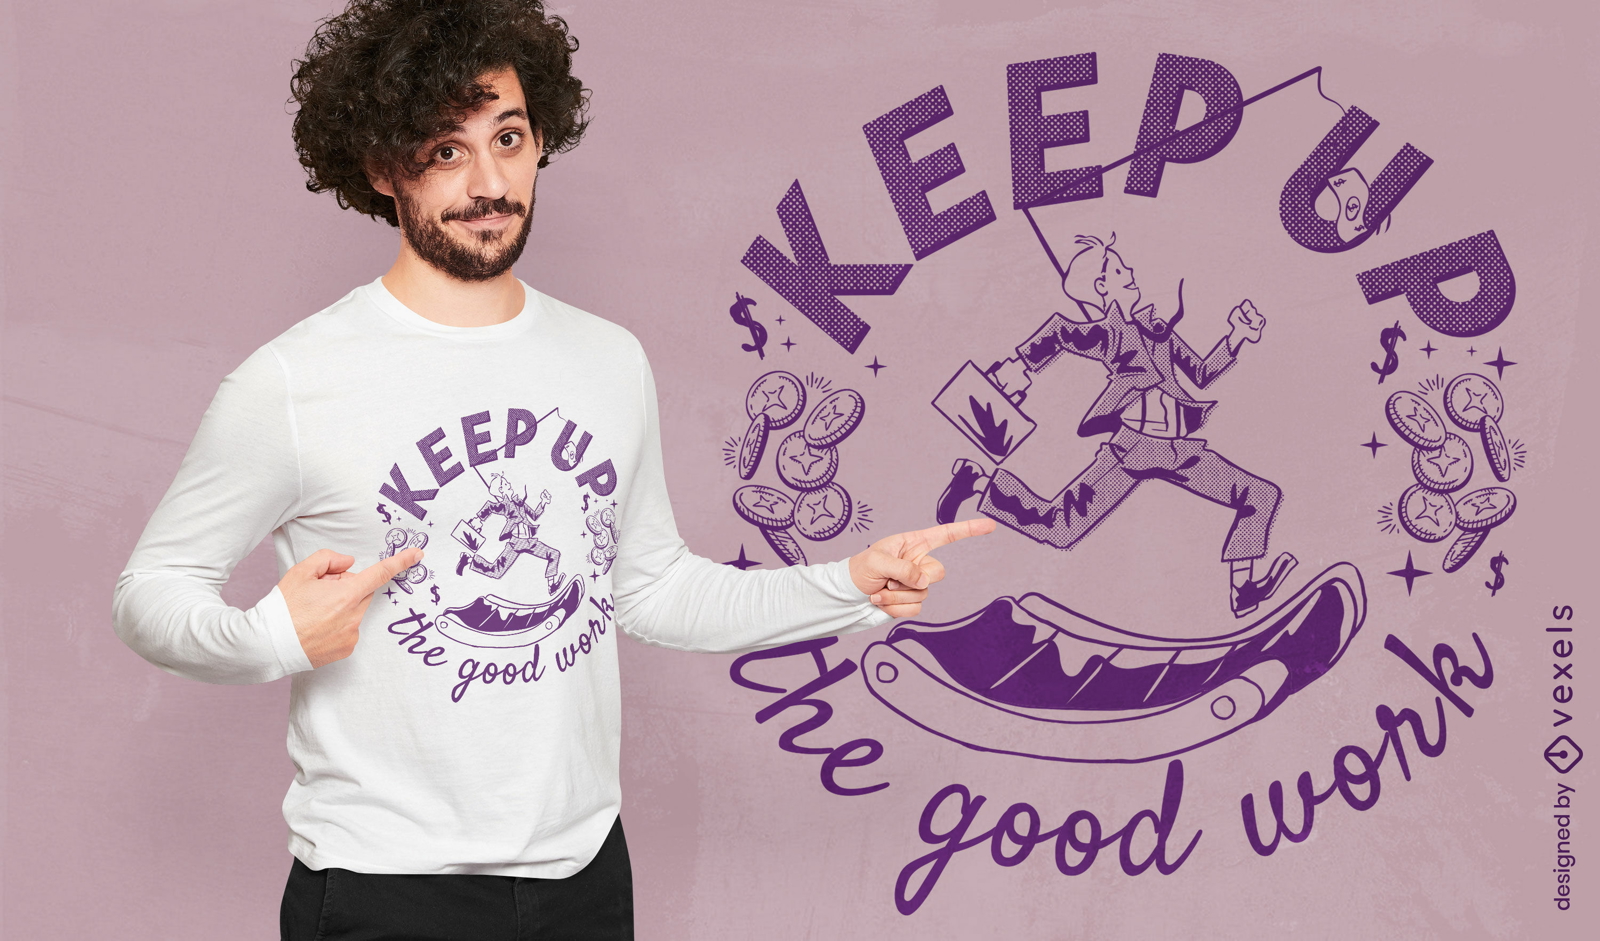 Workers' day keep up the good work quote t-shirt design